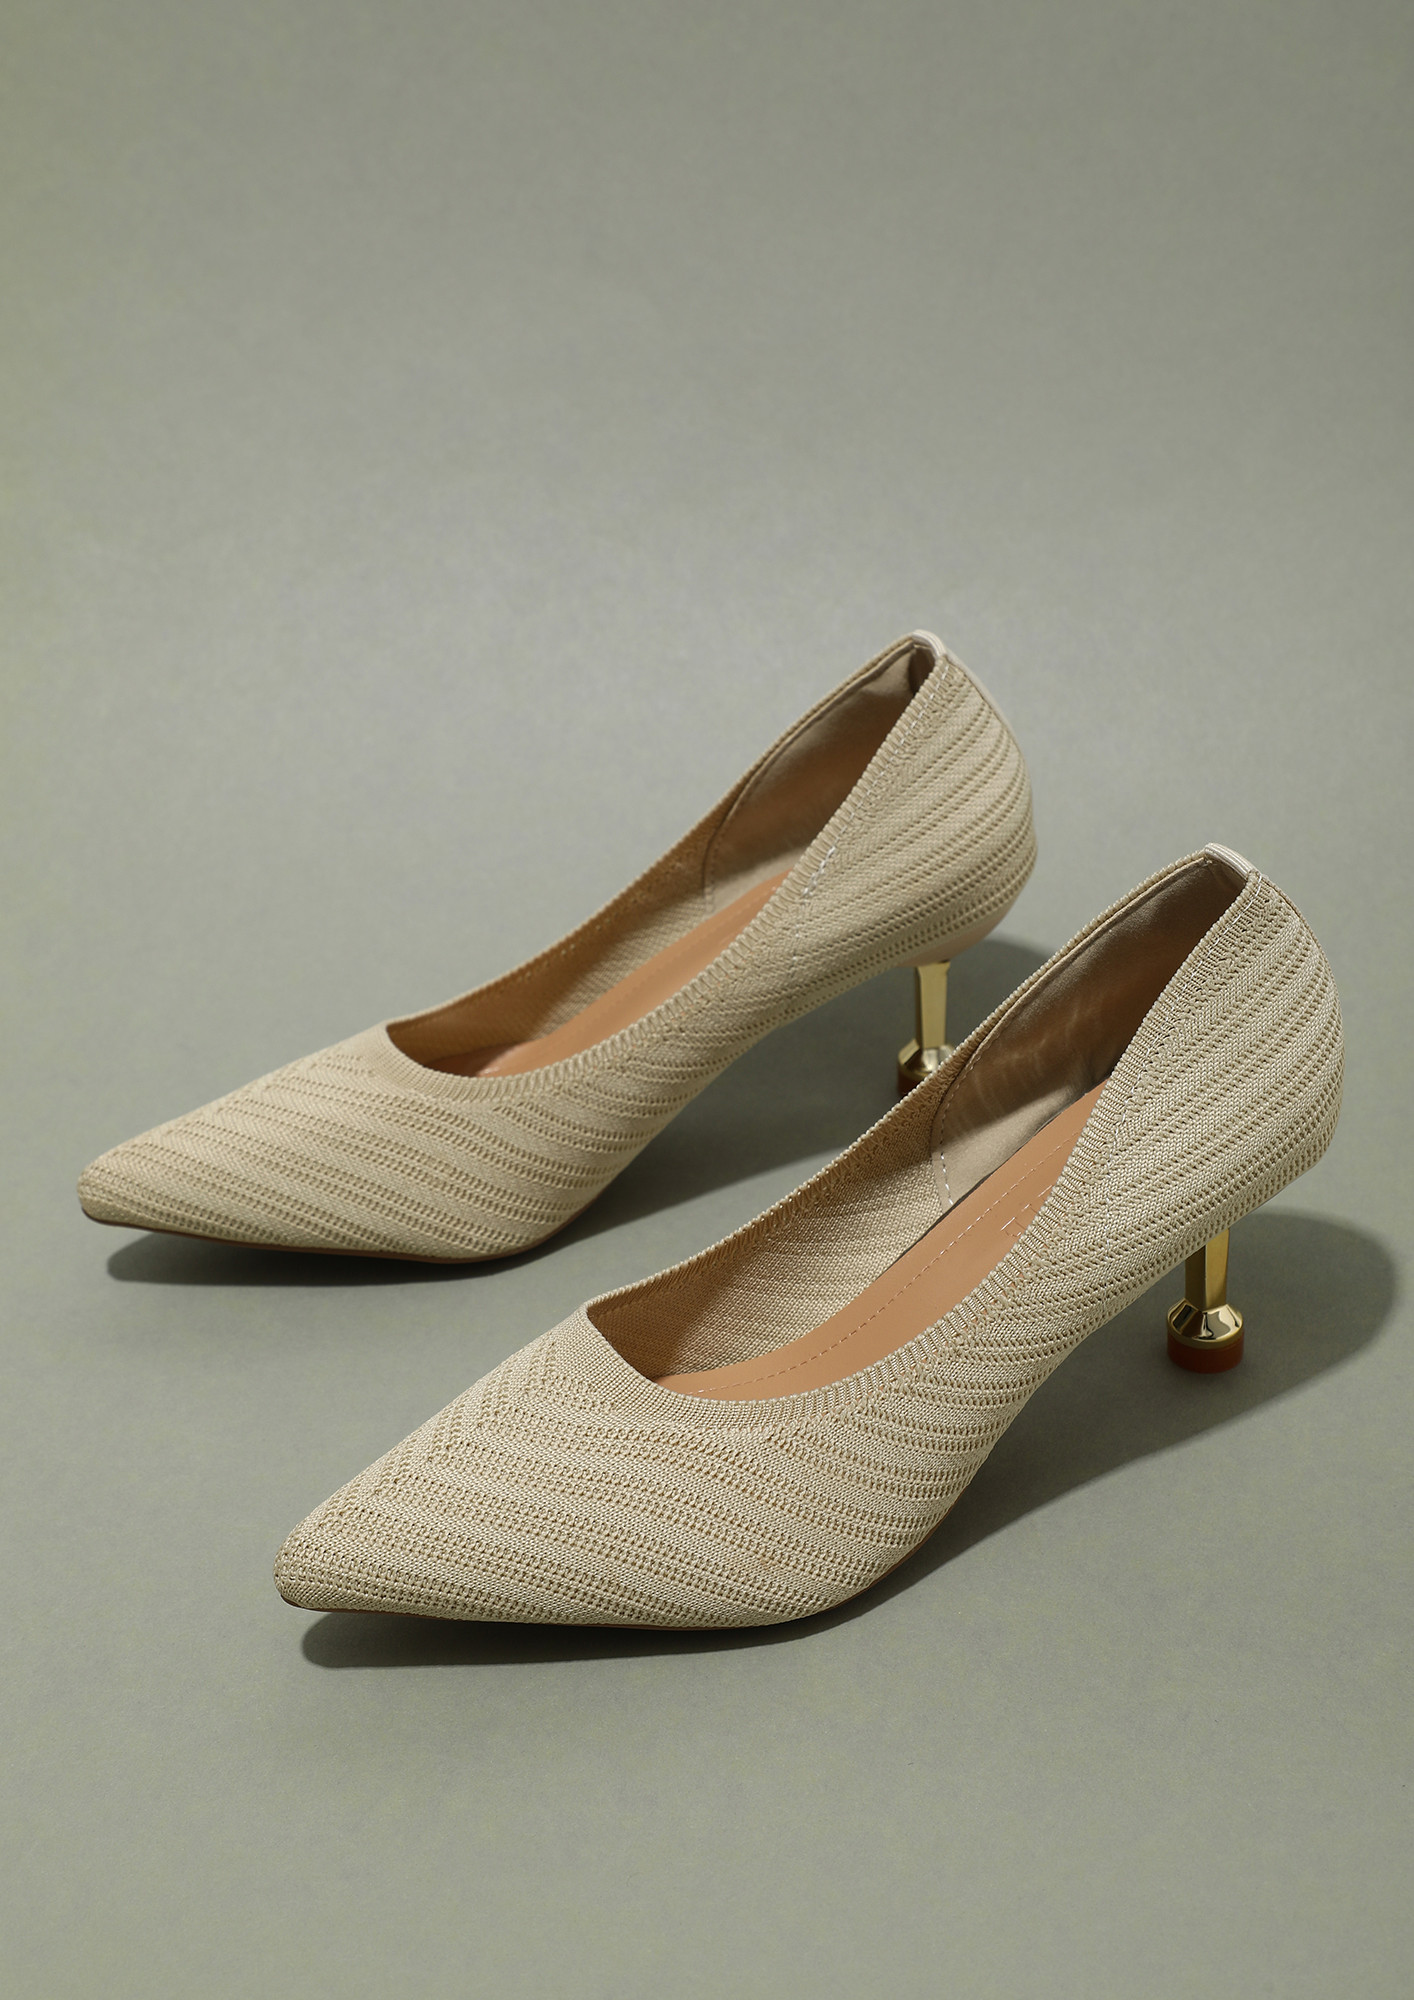 MATTE FINISH BEIGE PUMPS AND PEEP TOES